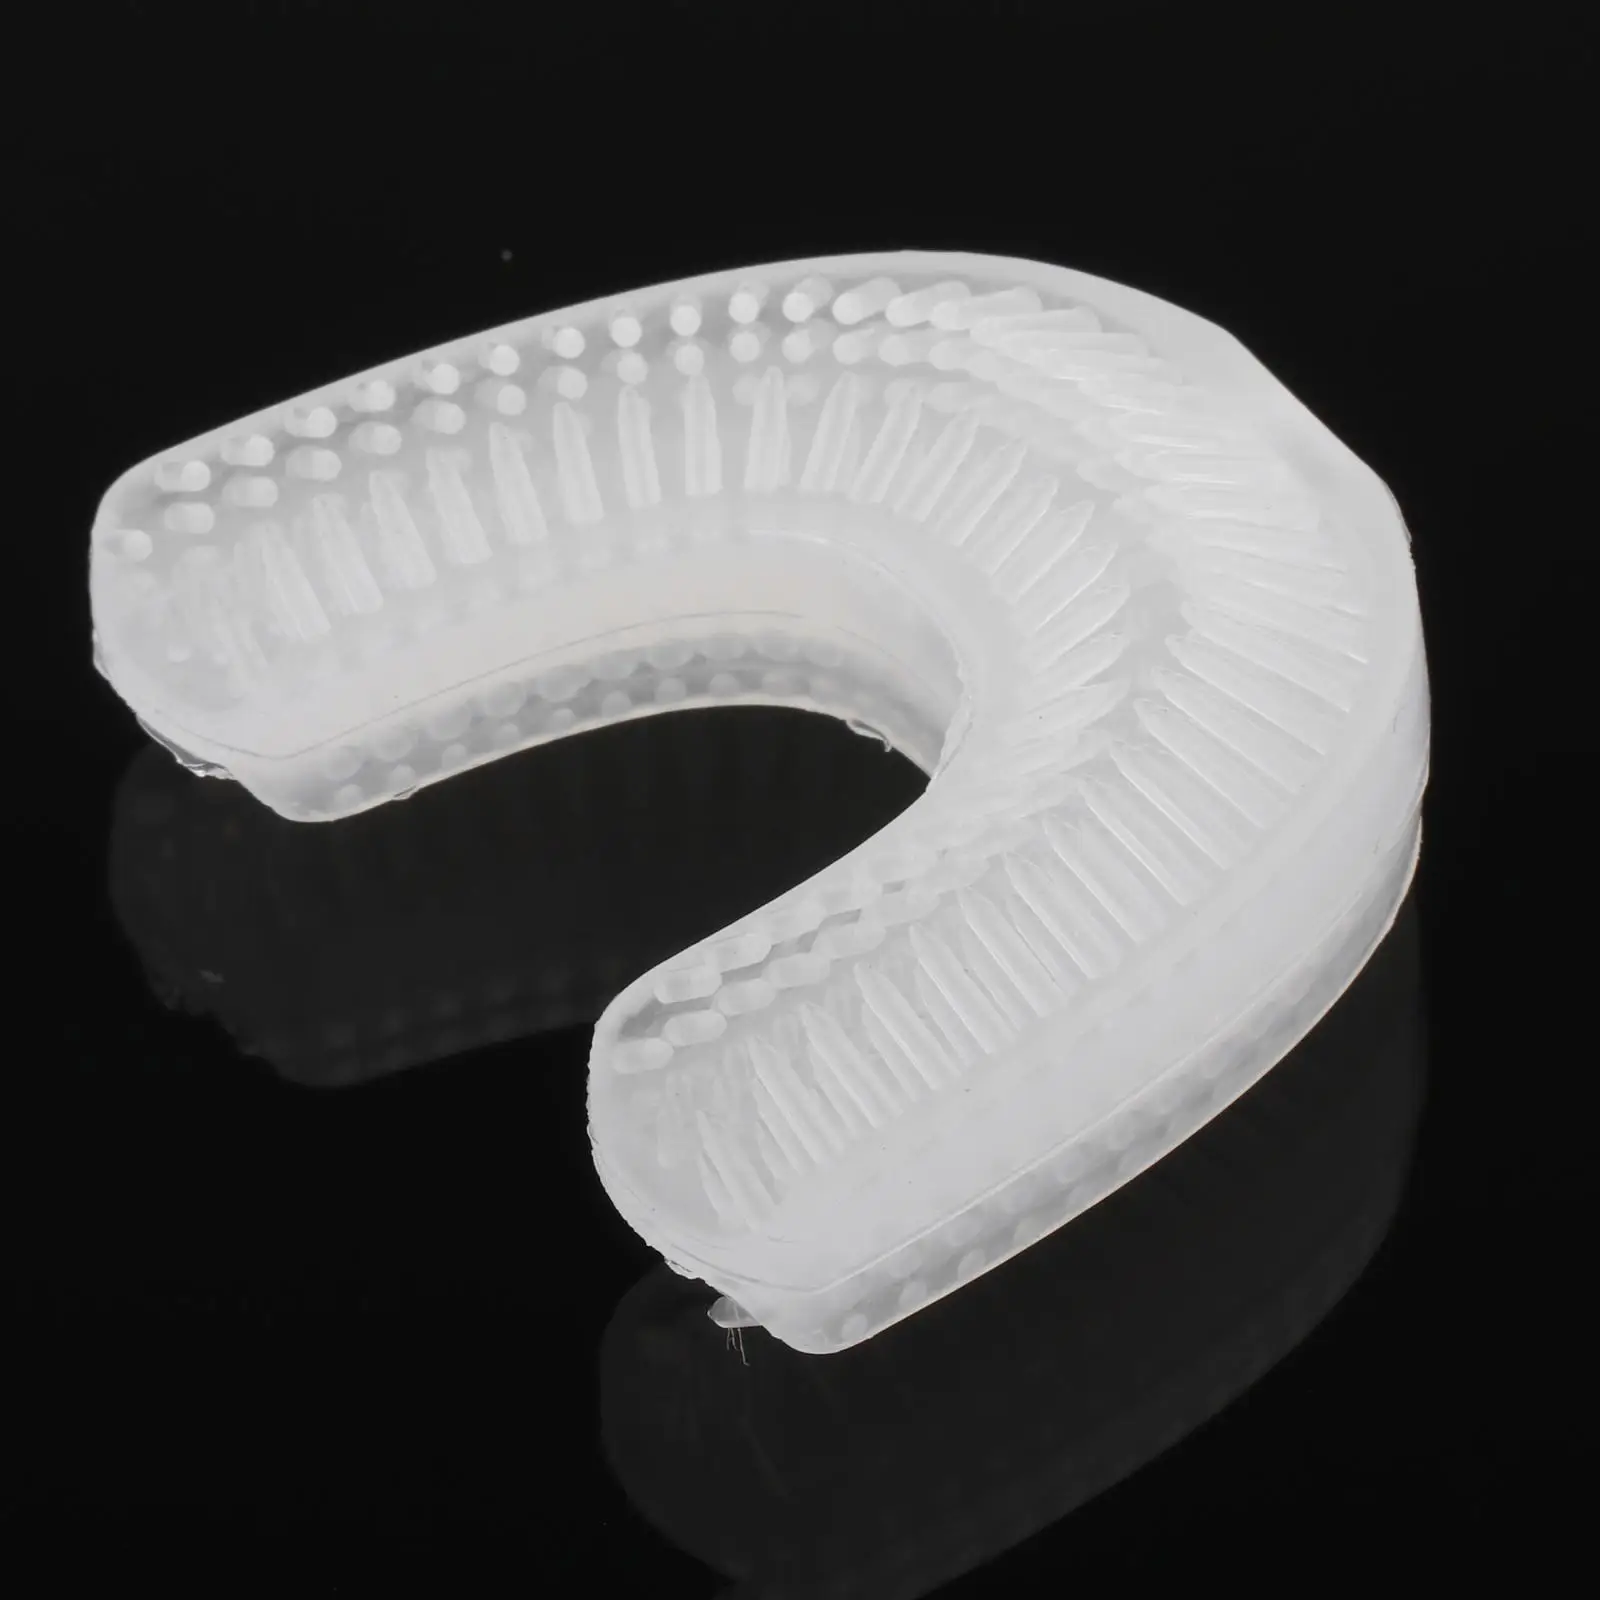 Edible Silicone U-shaped Toothbrush Heads 360 Degree Brush Heads Replacement